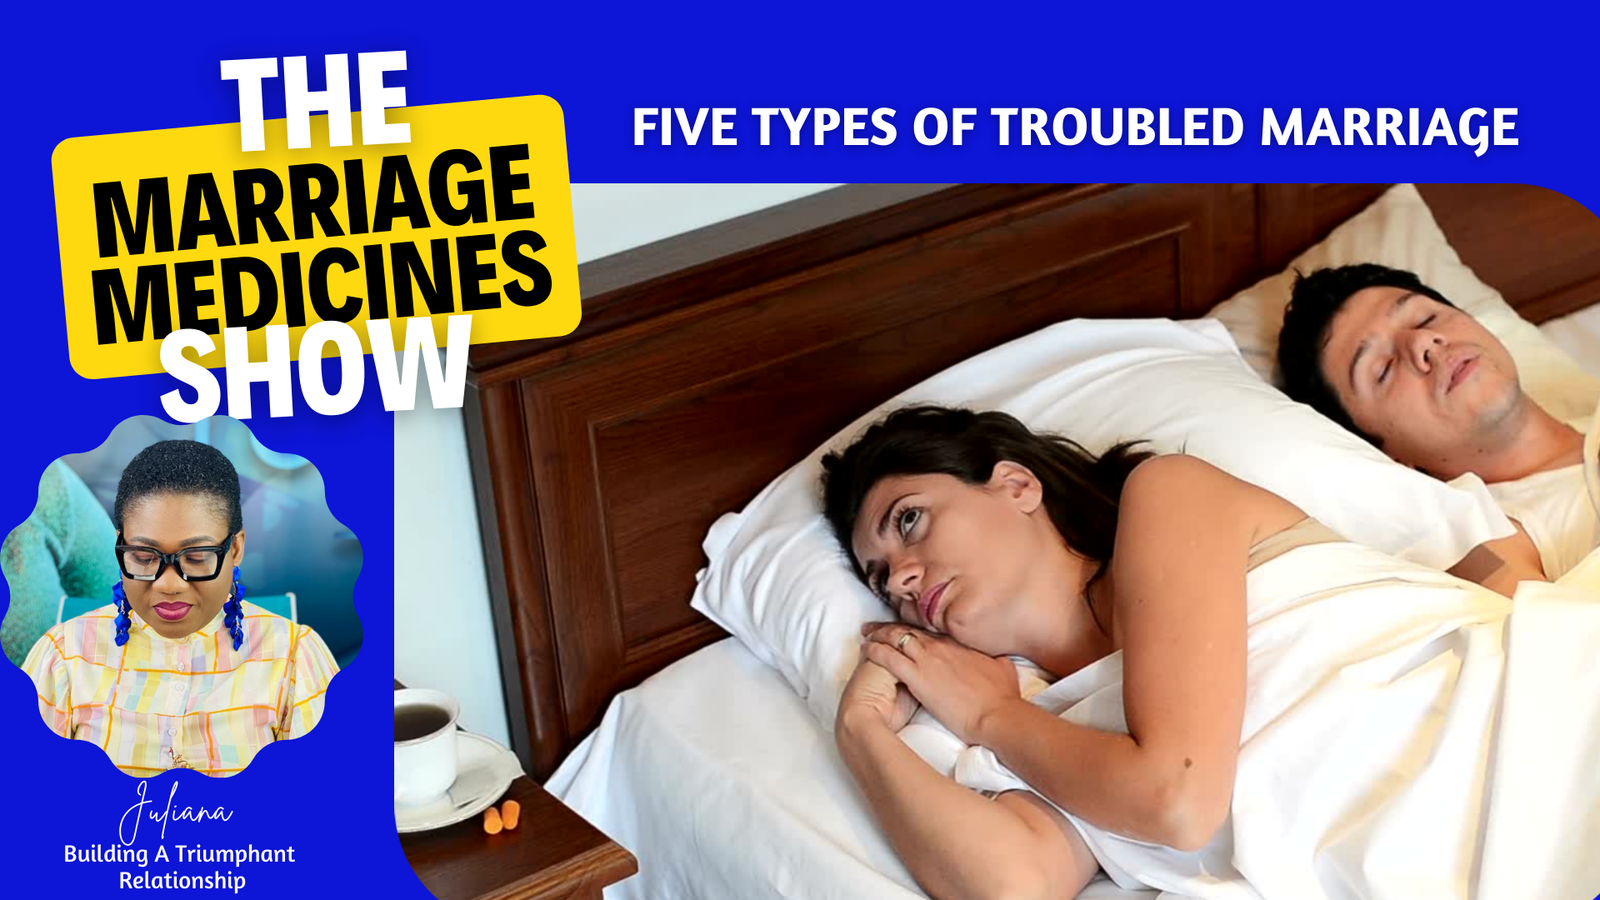 MMSI 12 - FIVE TYPES OF TROUBLED MARRIAGE (1)